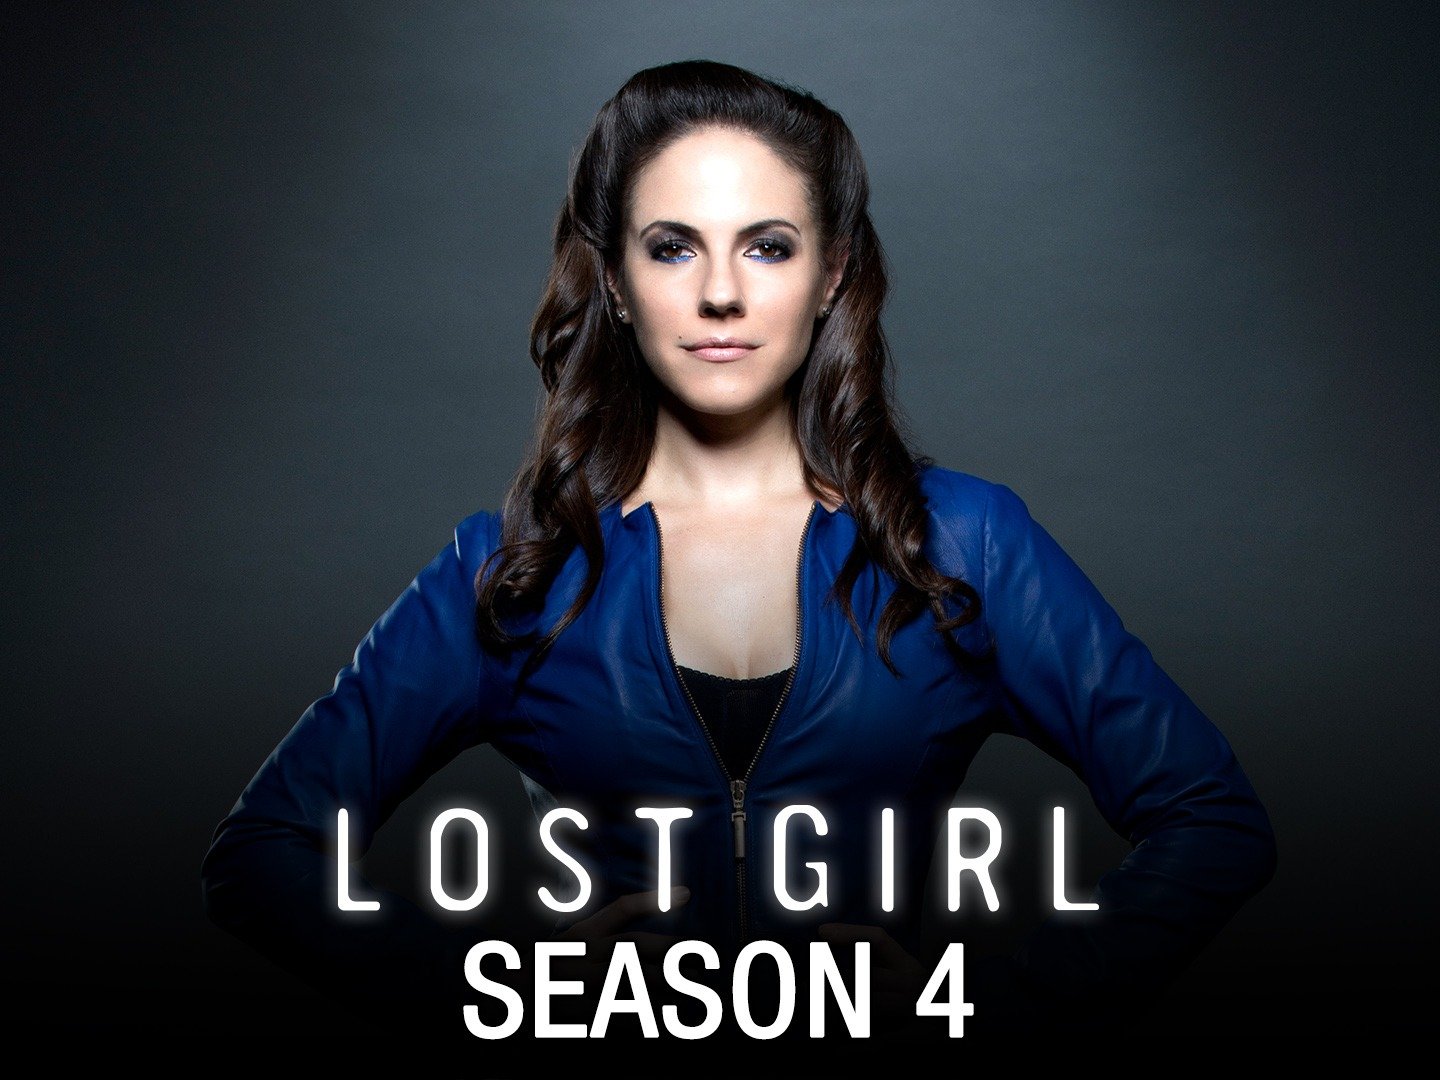 tamsin lost girl actress